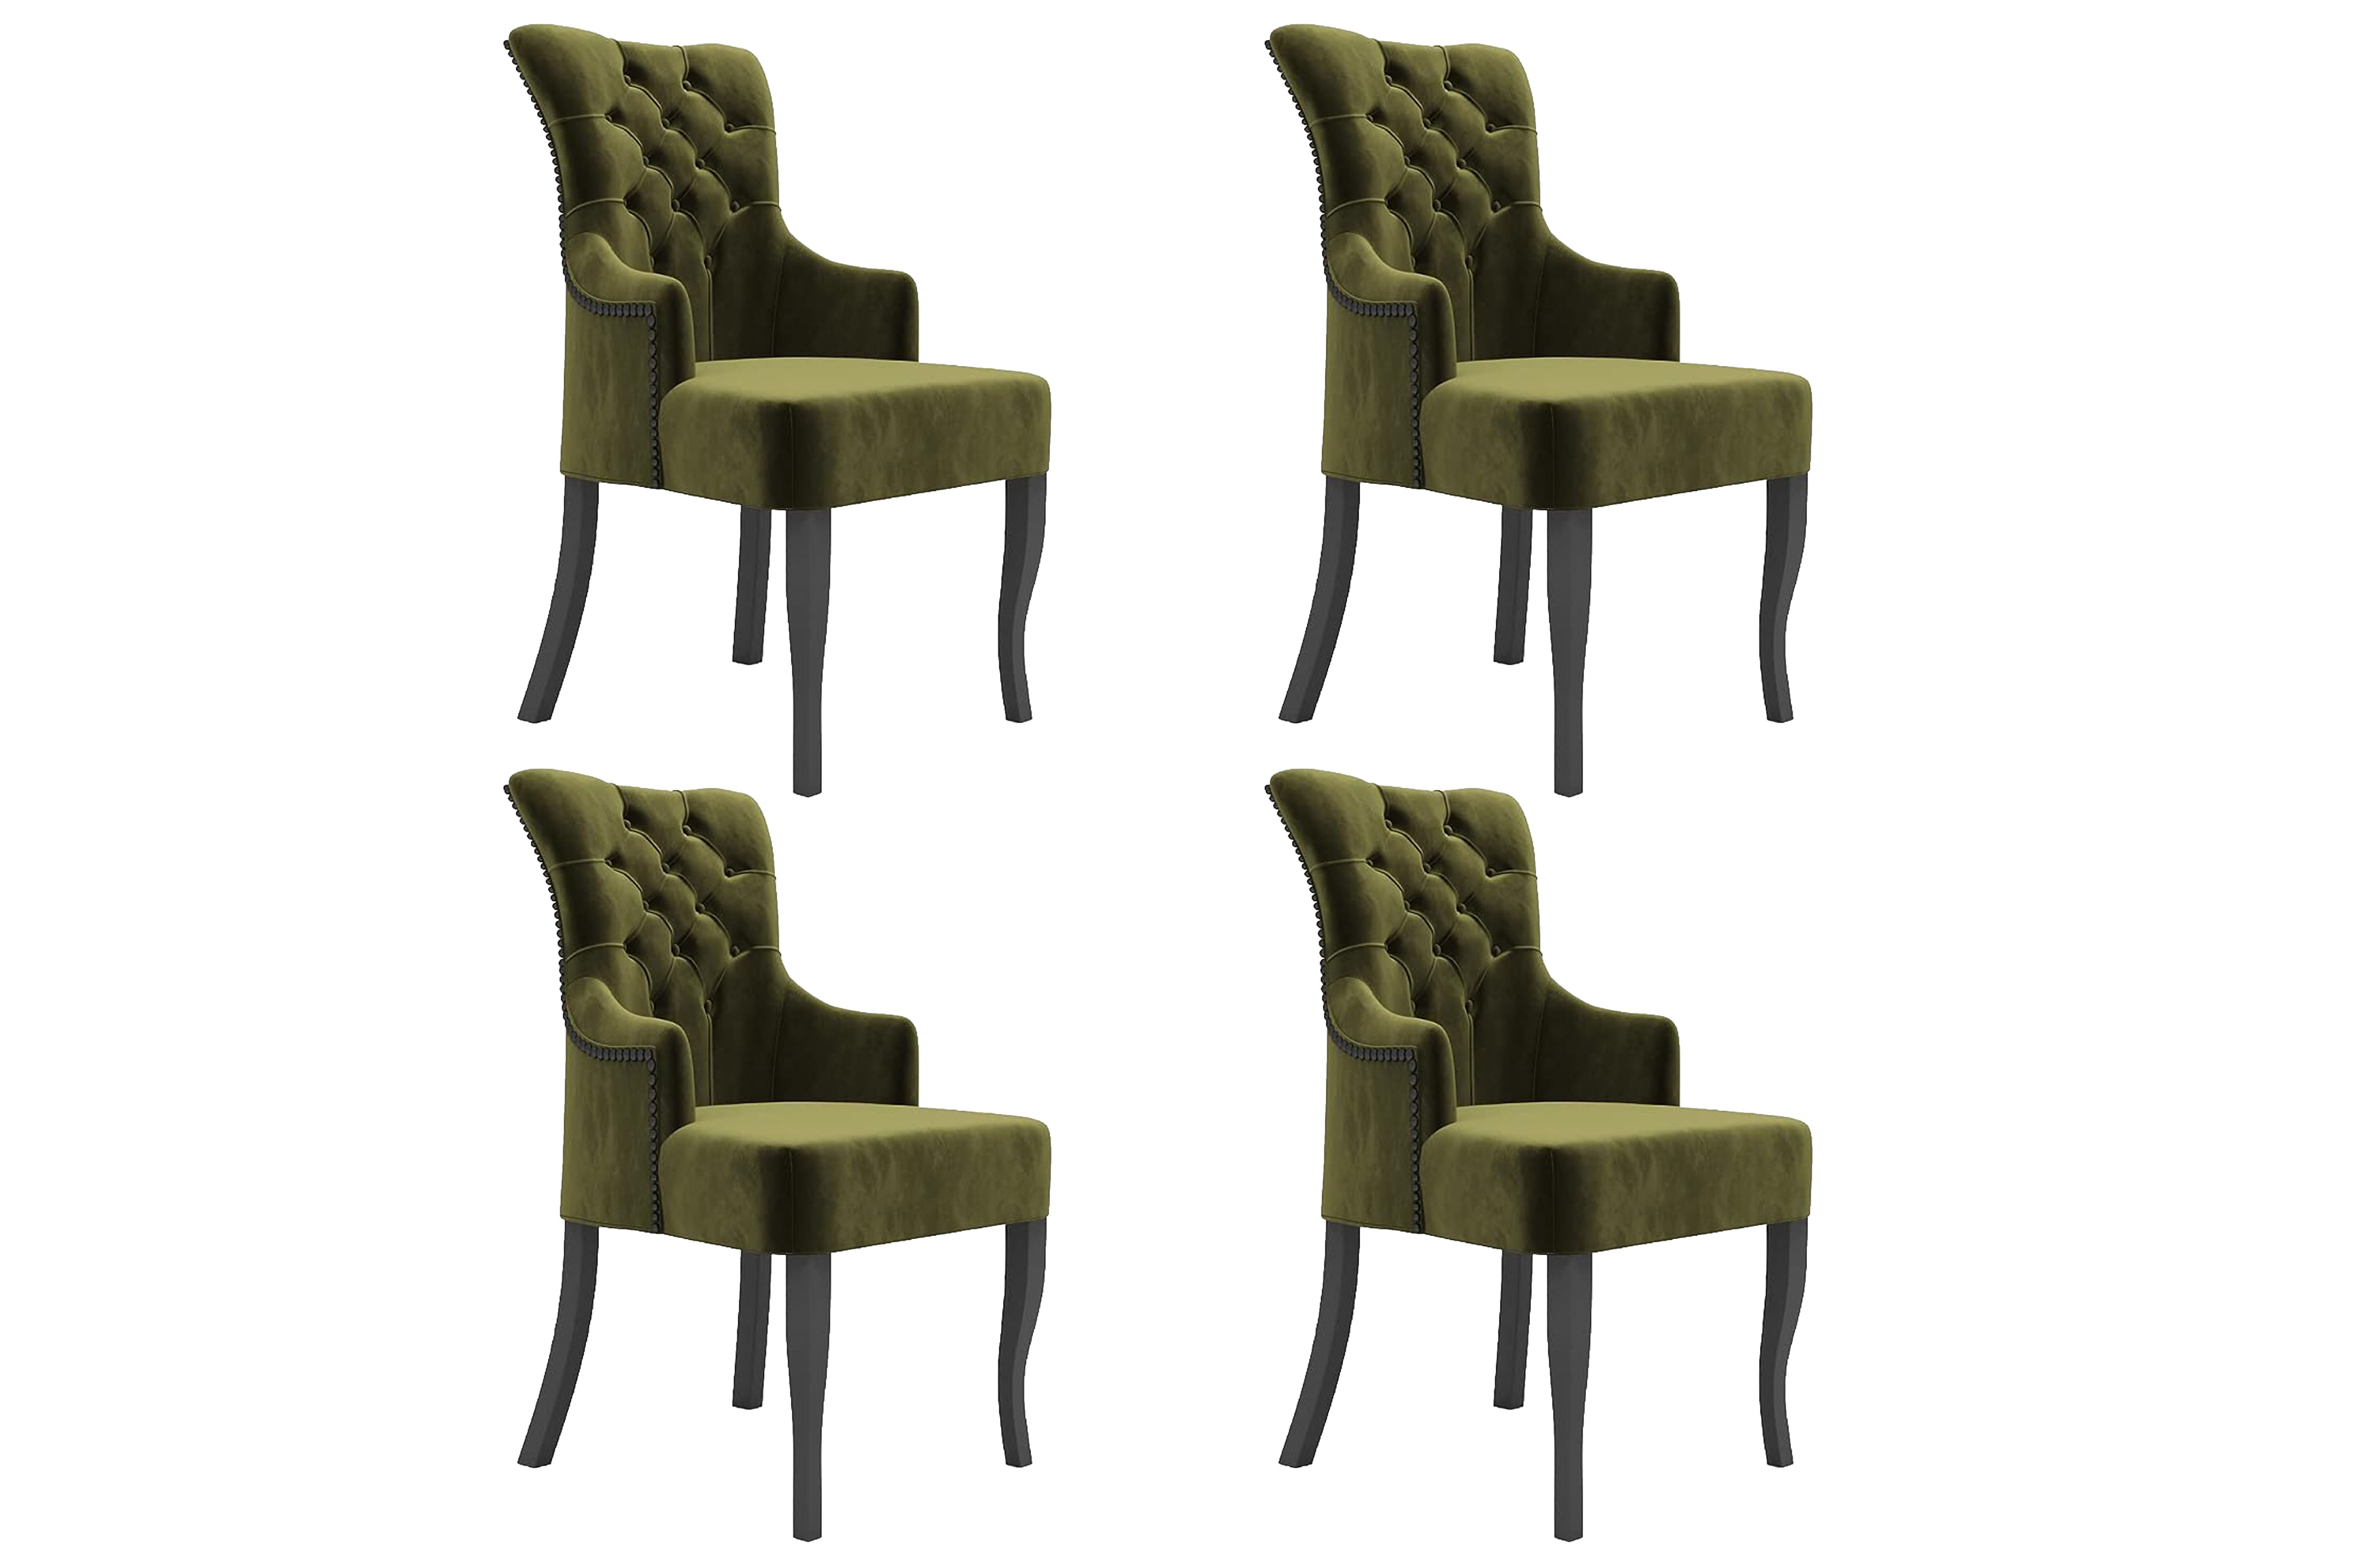 Dynamo green dining chair (set of 4)